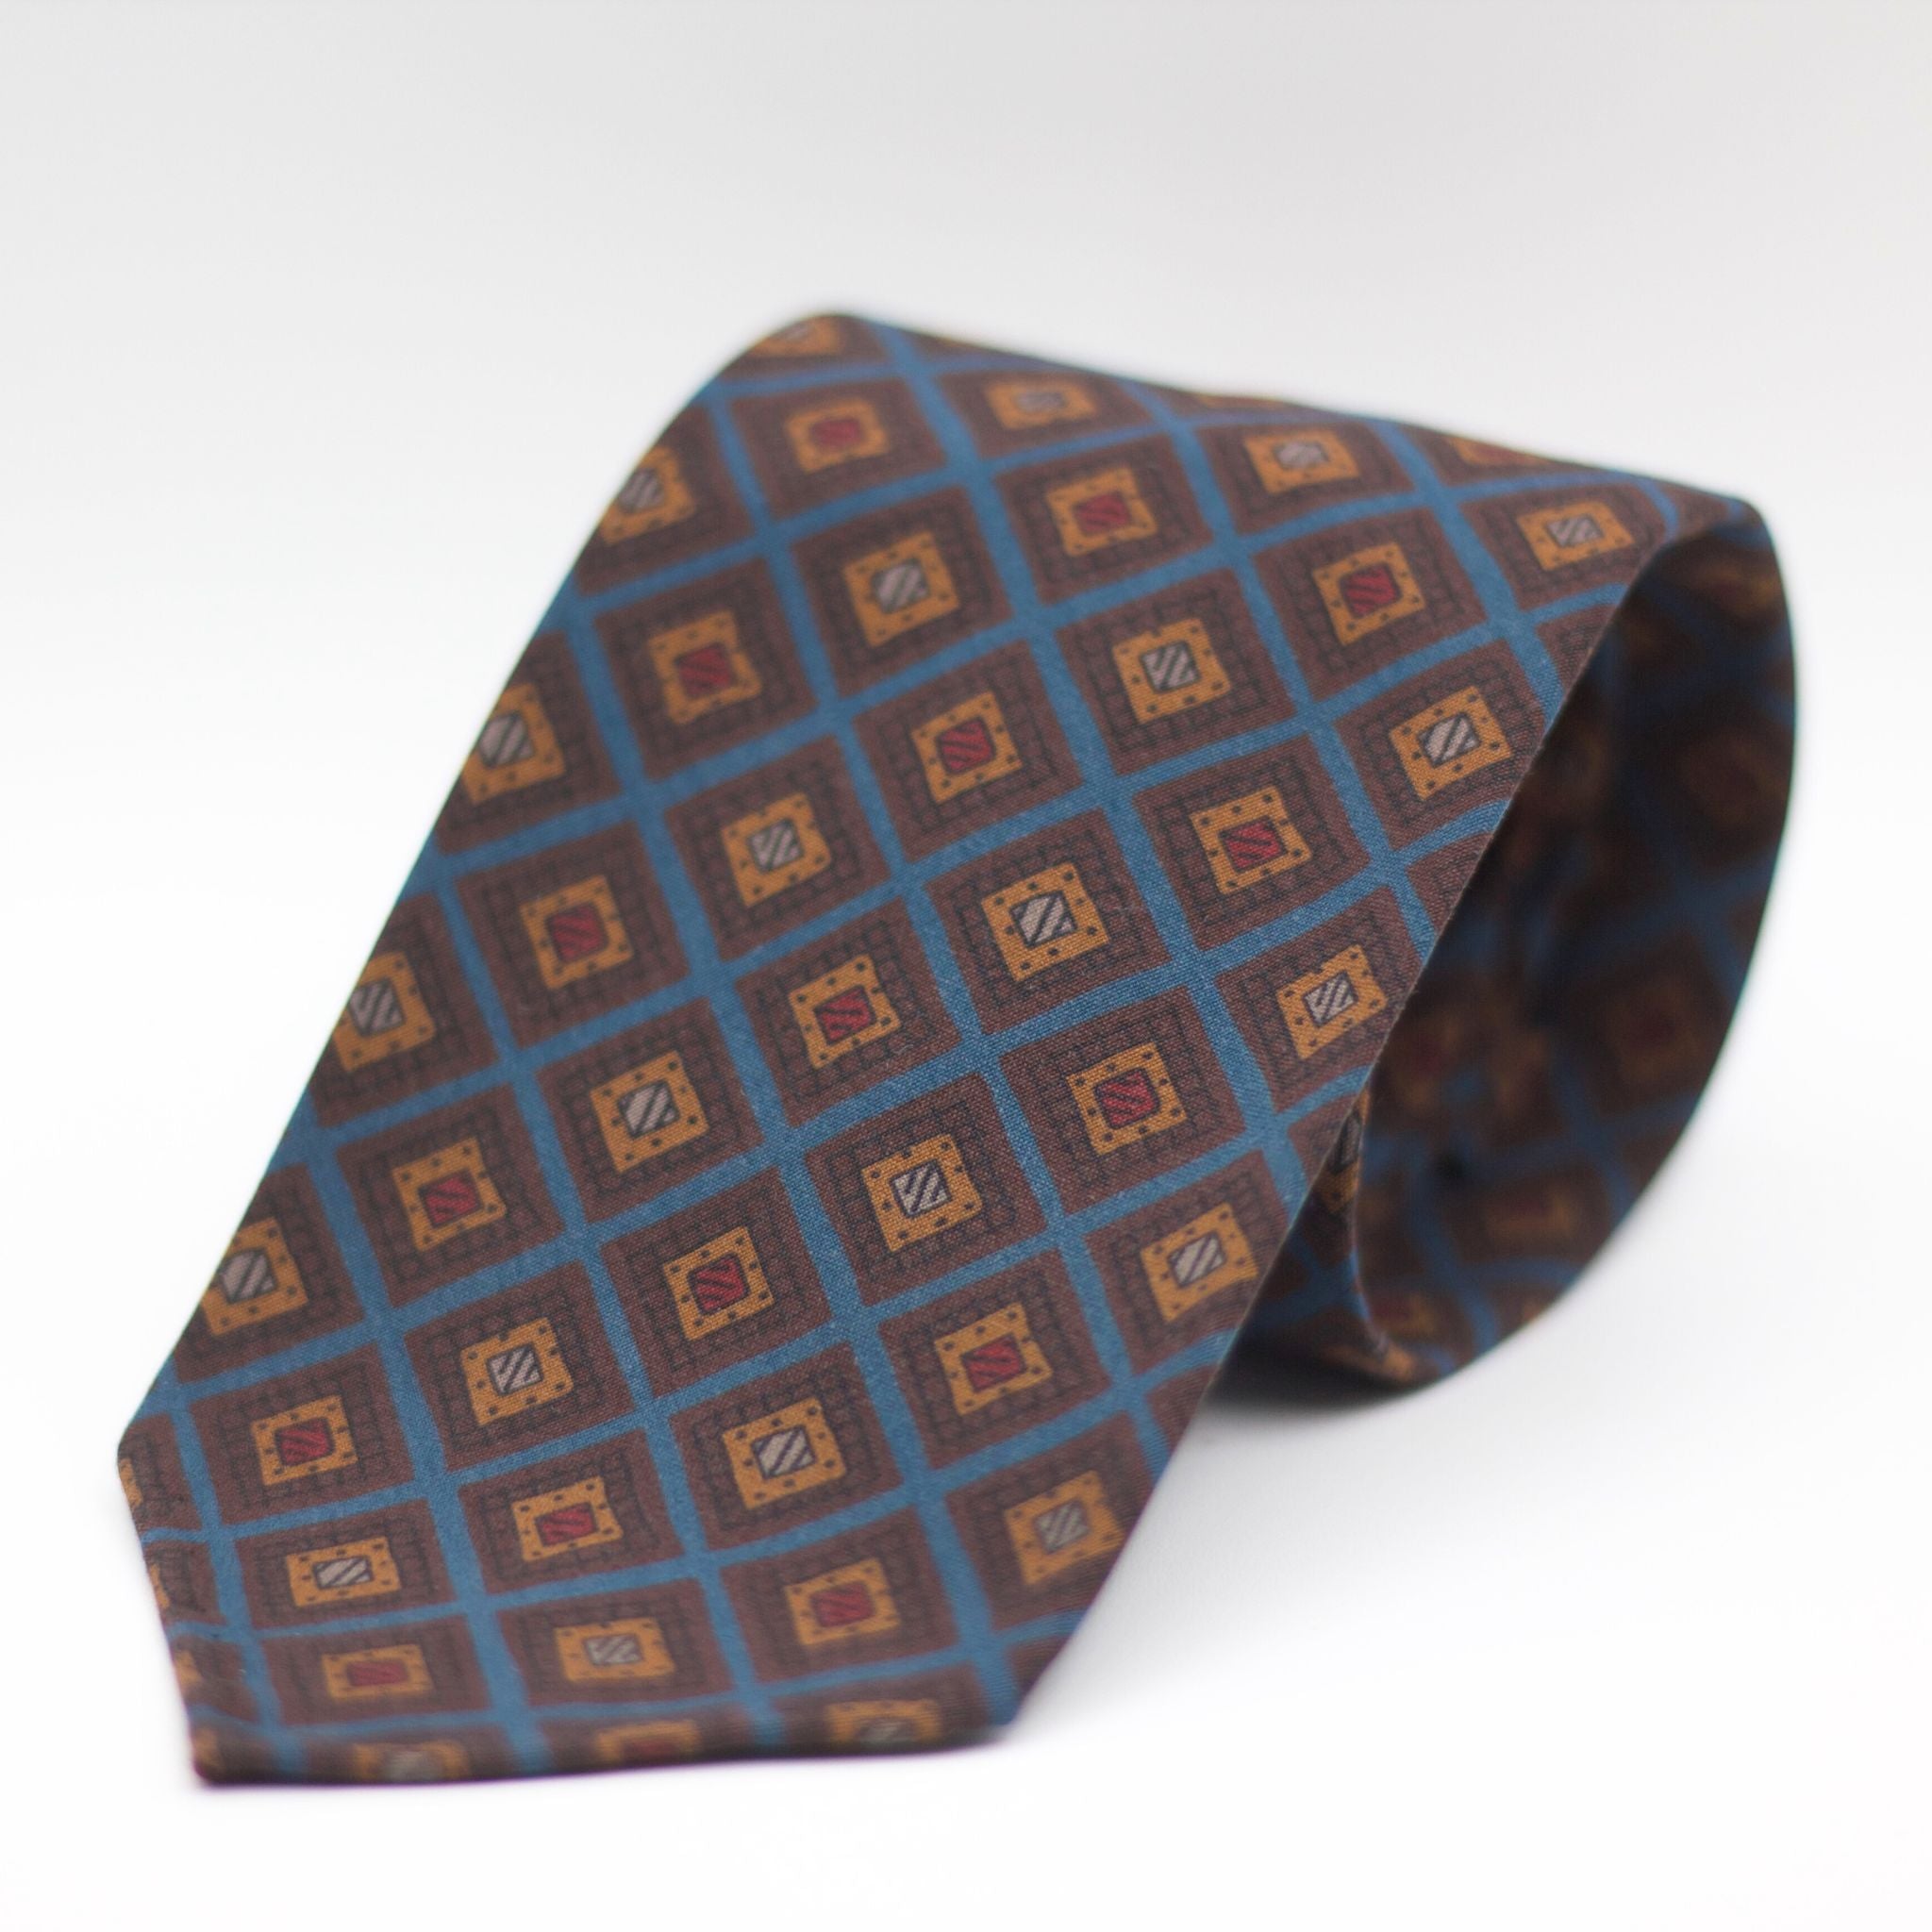 Cruciani & Bella 100% Printed Madder Silk  Italian fabric Unlined tie Light Blue, Brown and Burgundy Unlined Tie Handmade in Italy 8 cm x 150 cm